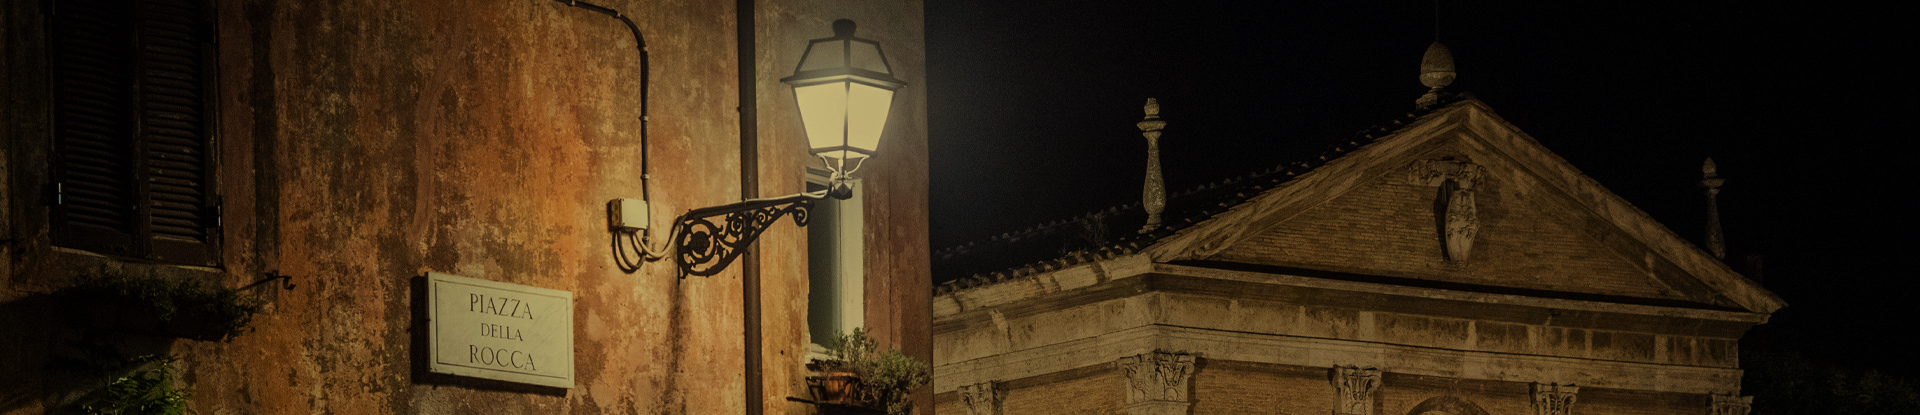 New artistic lighting system in the Old Town of Ostia Antica